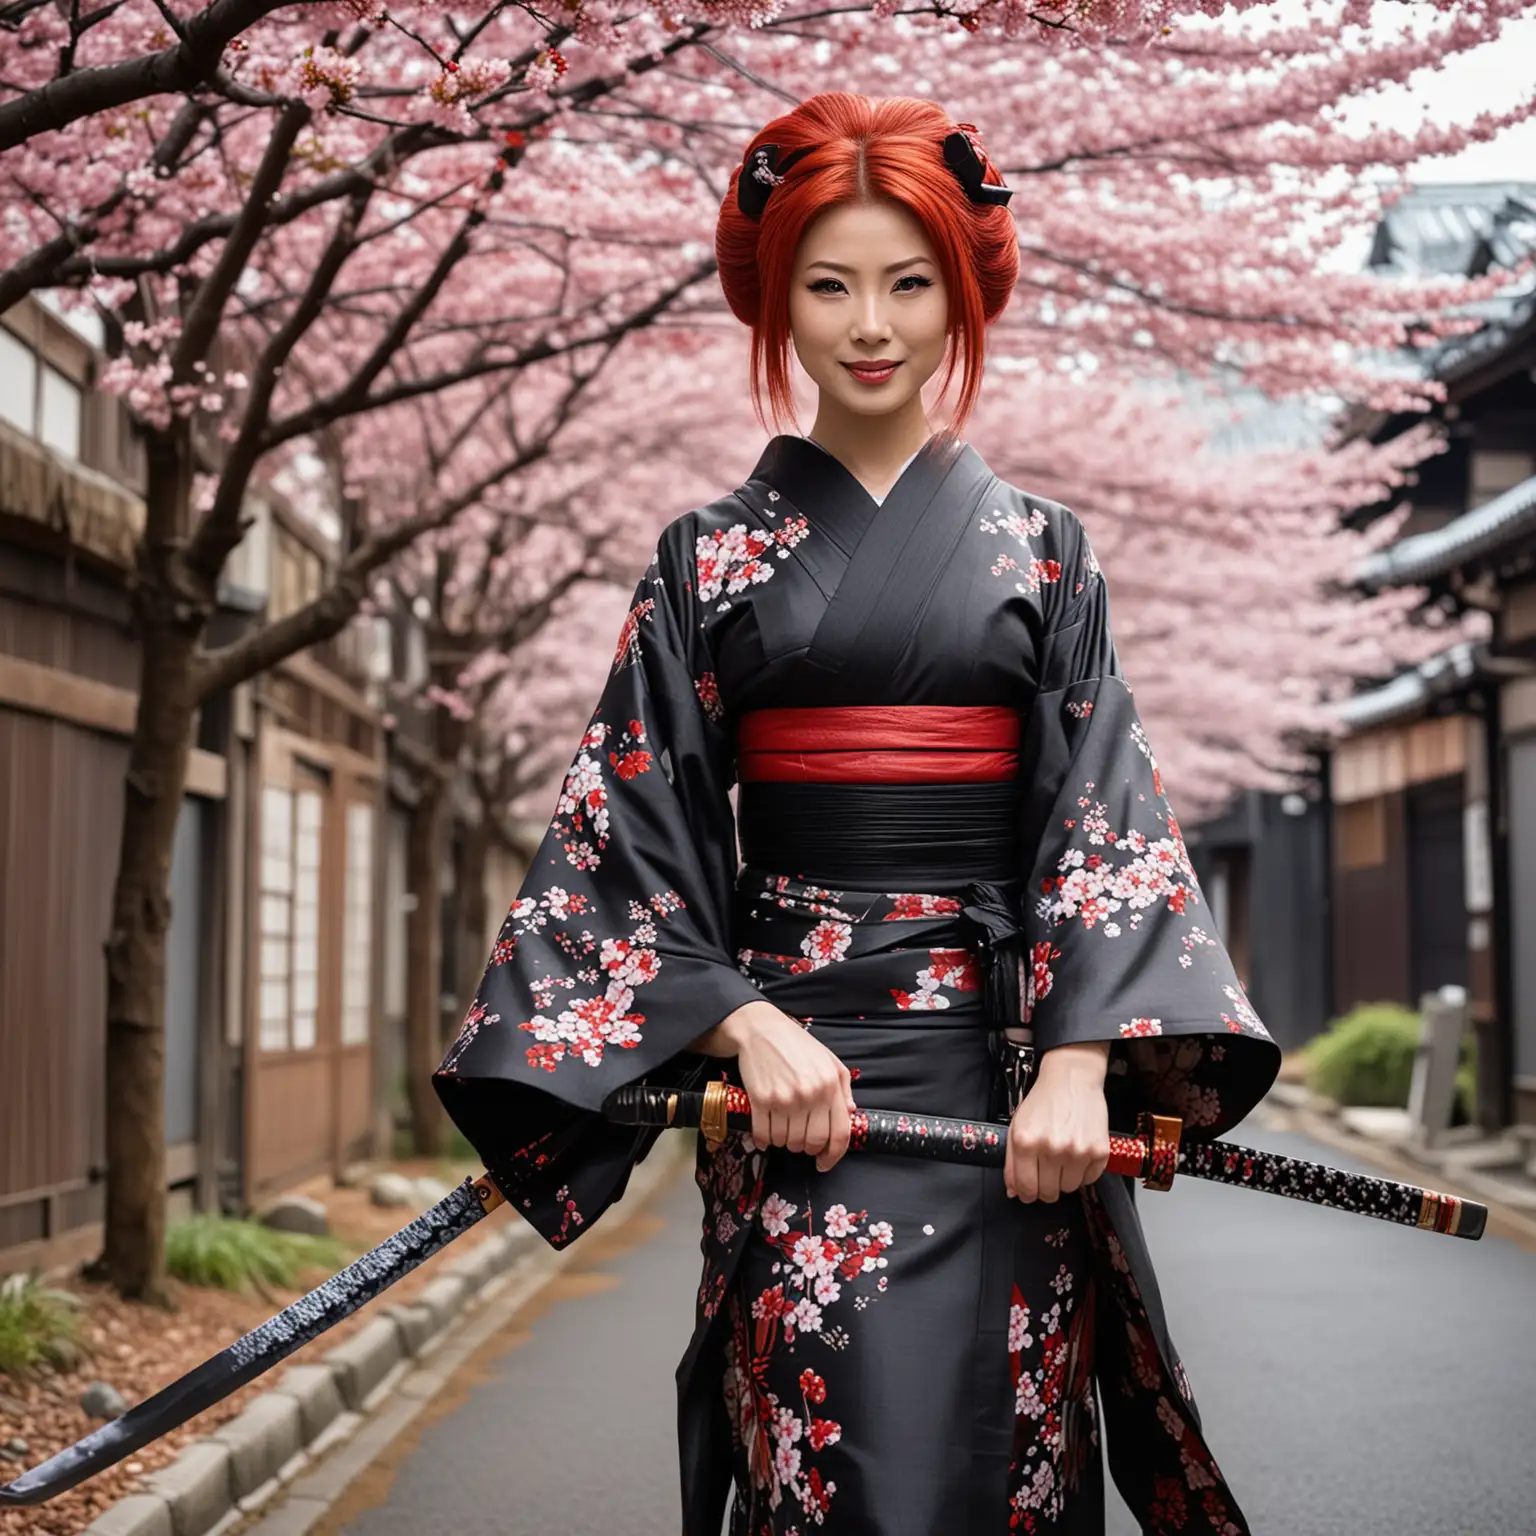 A 45 year old futuristic geisha, who is also a master swordswoman. She is dressed in a carbon fibre kimono. She is in the streets of Neo Edo, with blossom all over the ground. She has red hair, looks confident, with a killer smile